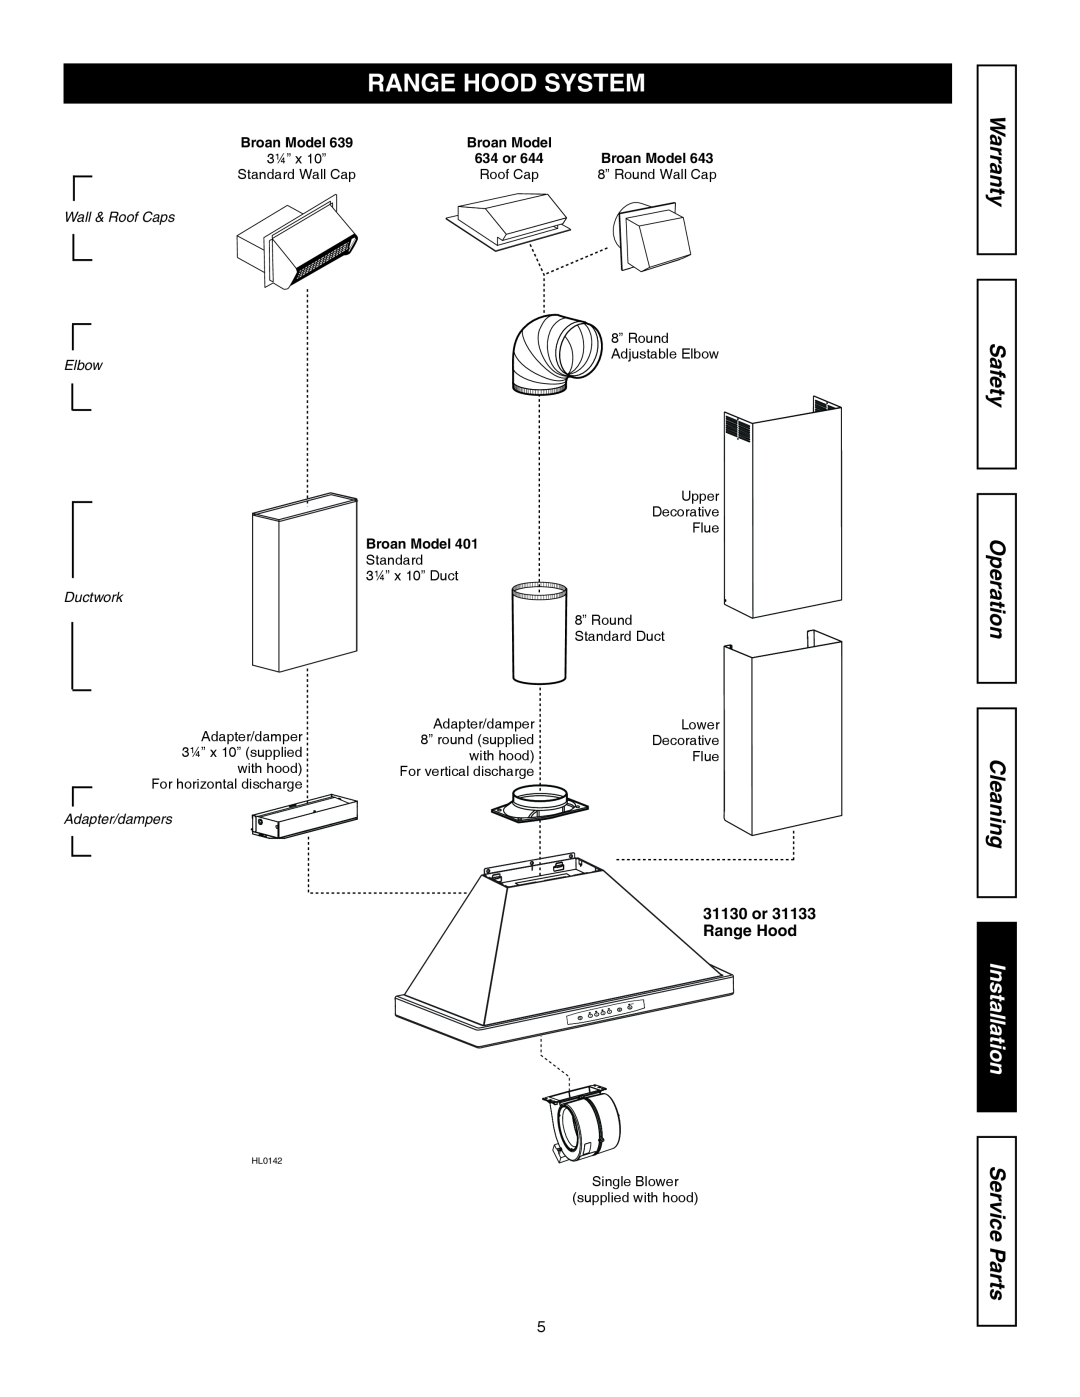 Kenmore 31130, 31133 Range Hood System, Warranty, Safety Operation, Cleaning, Installation, Service Parts, Adapter/dampers 